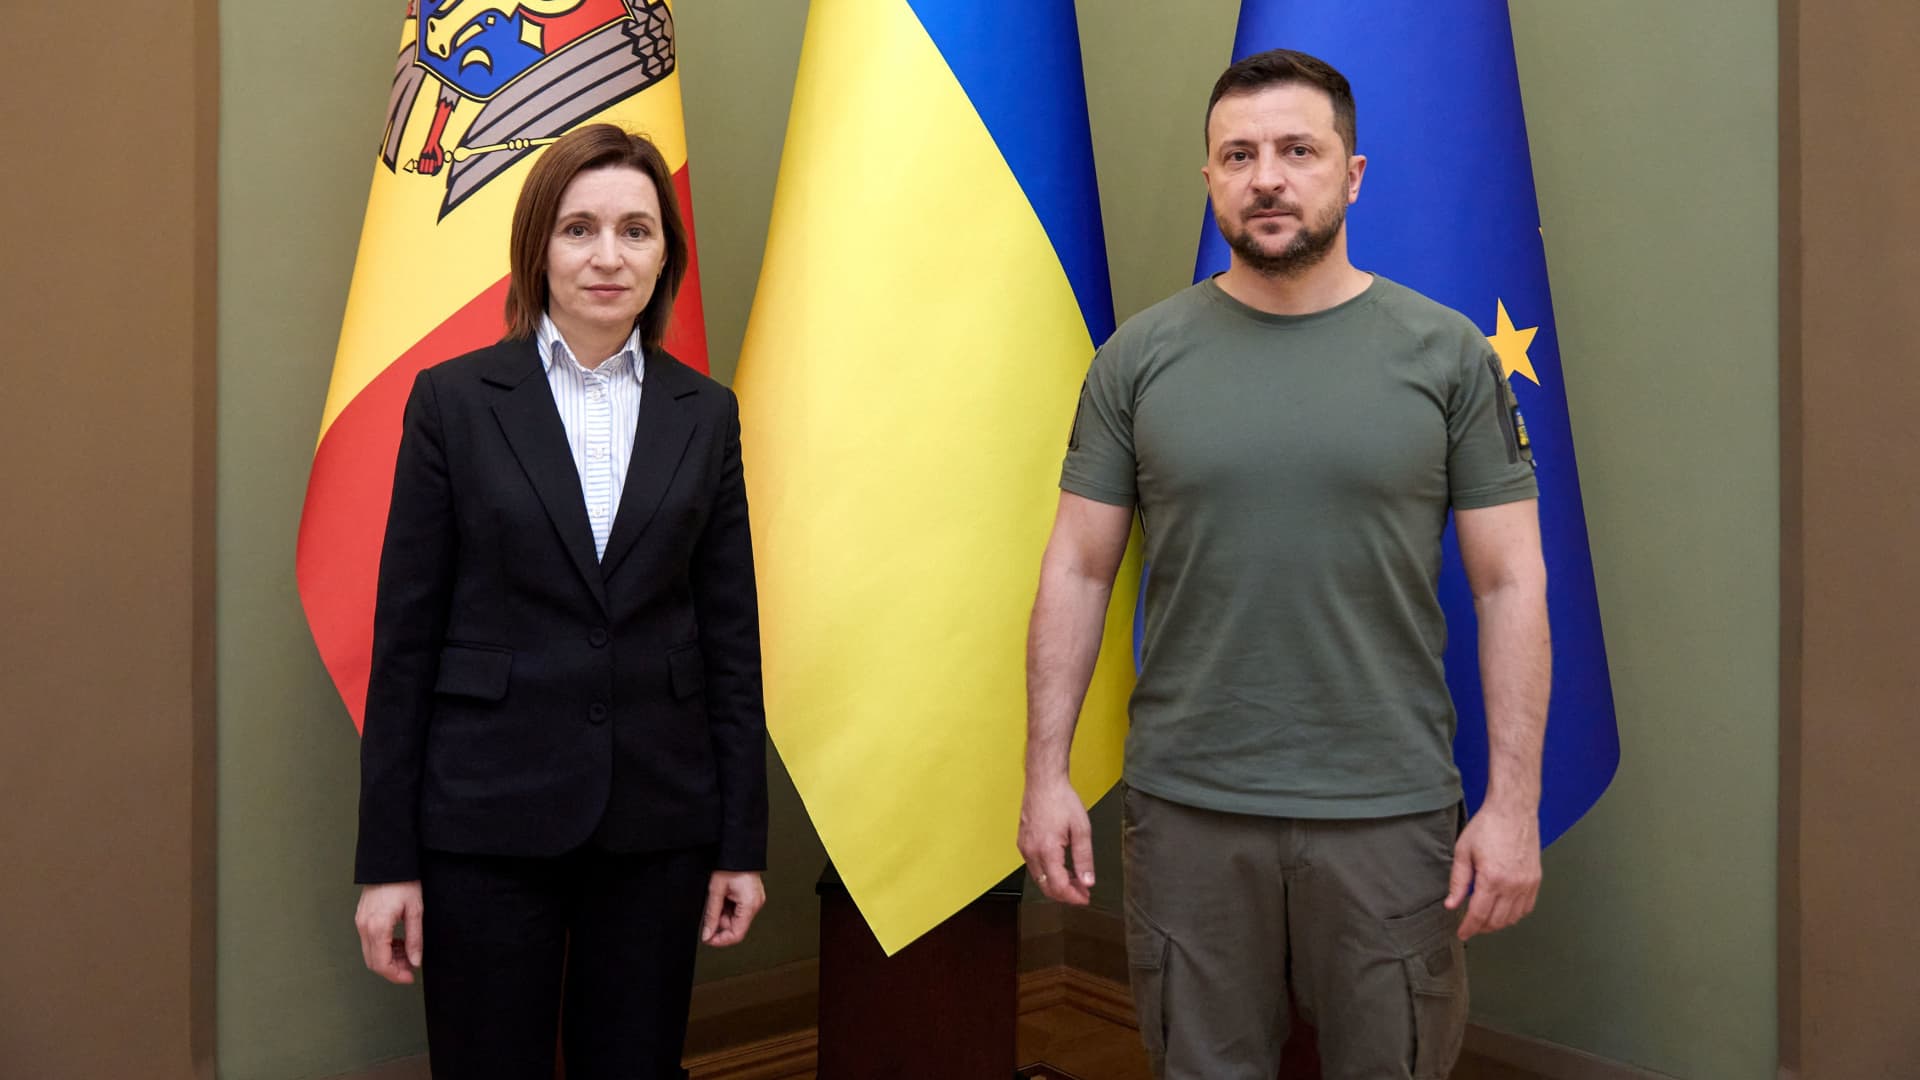 Moldova's President Maia Sandu and Ukraine's President Volodymyr Zelenskyy pose for a picture during a meeting, as Russia's attack on Ukraine continue, in Kyiv, Ukraine June 27, 2022.